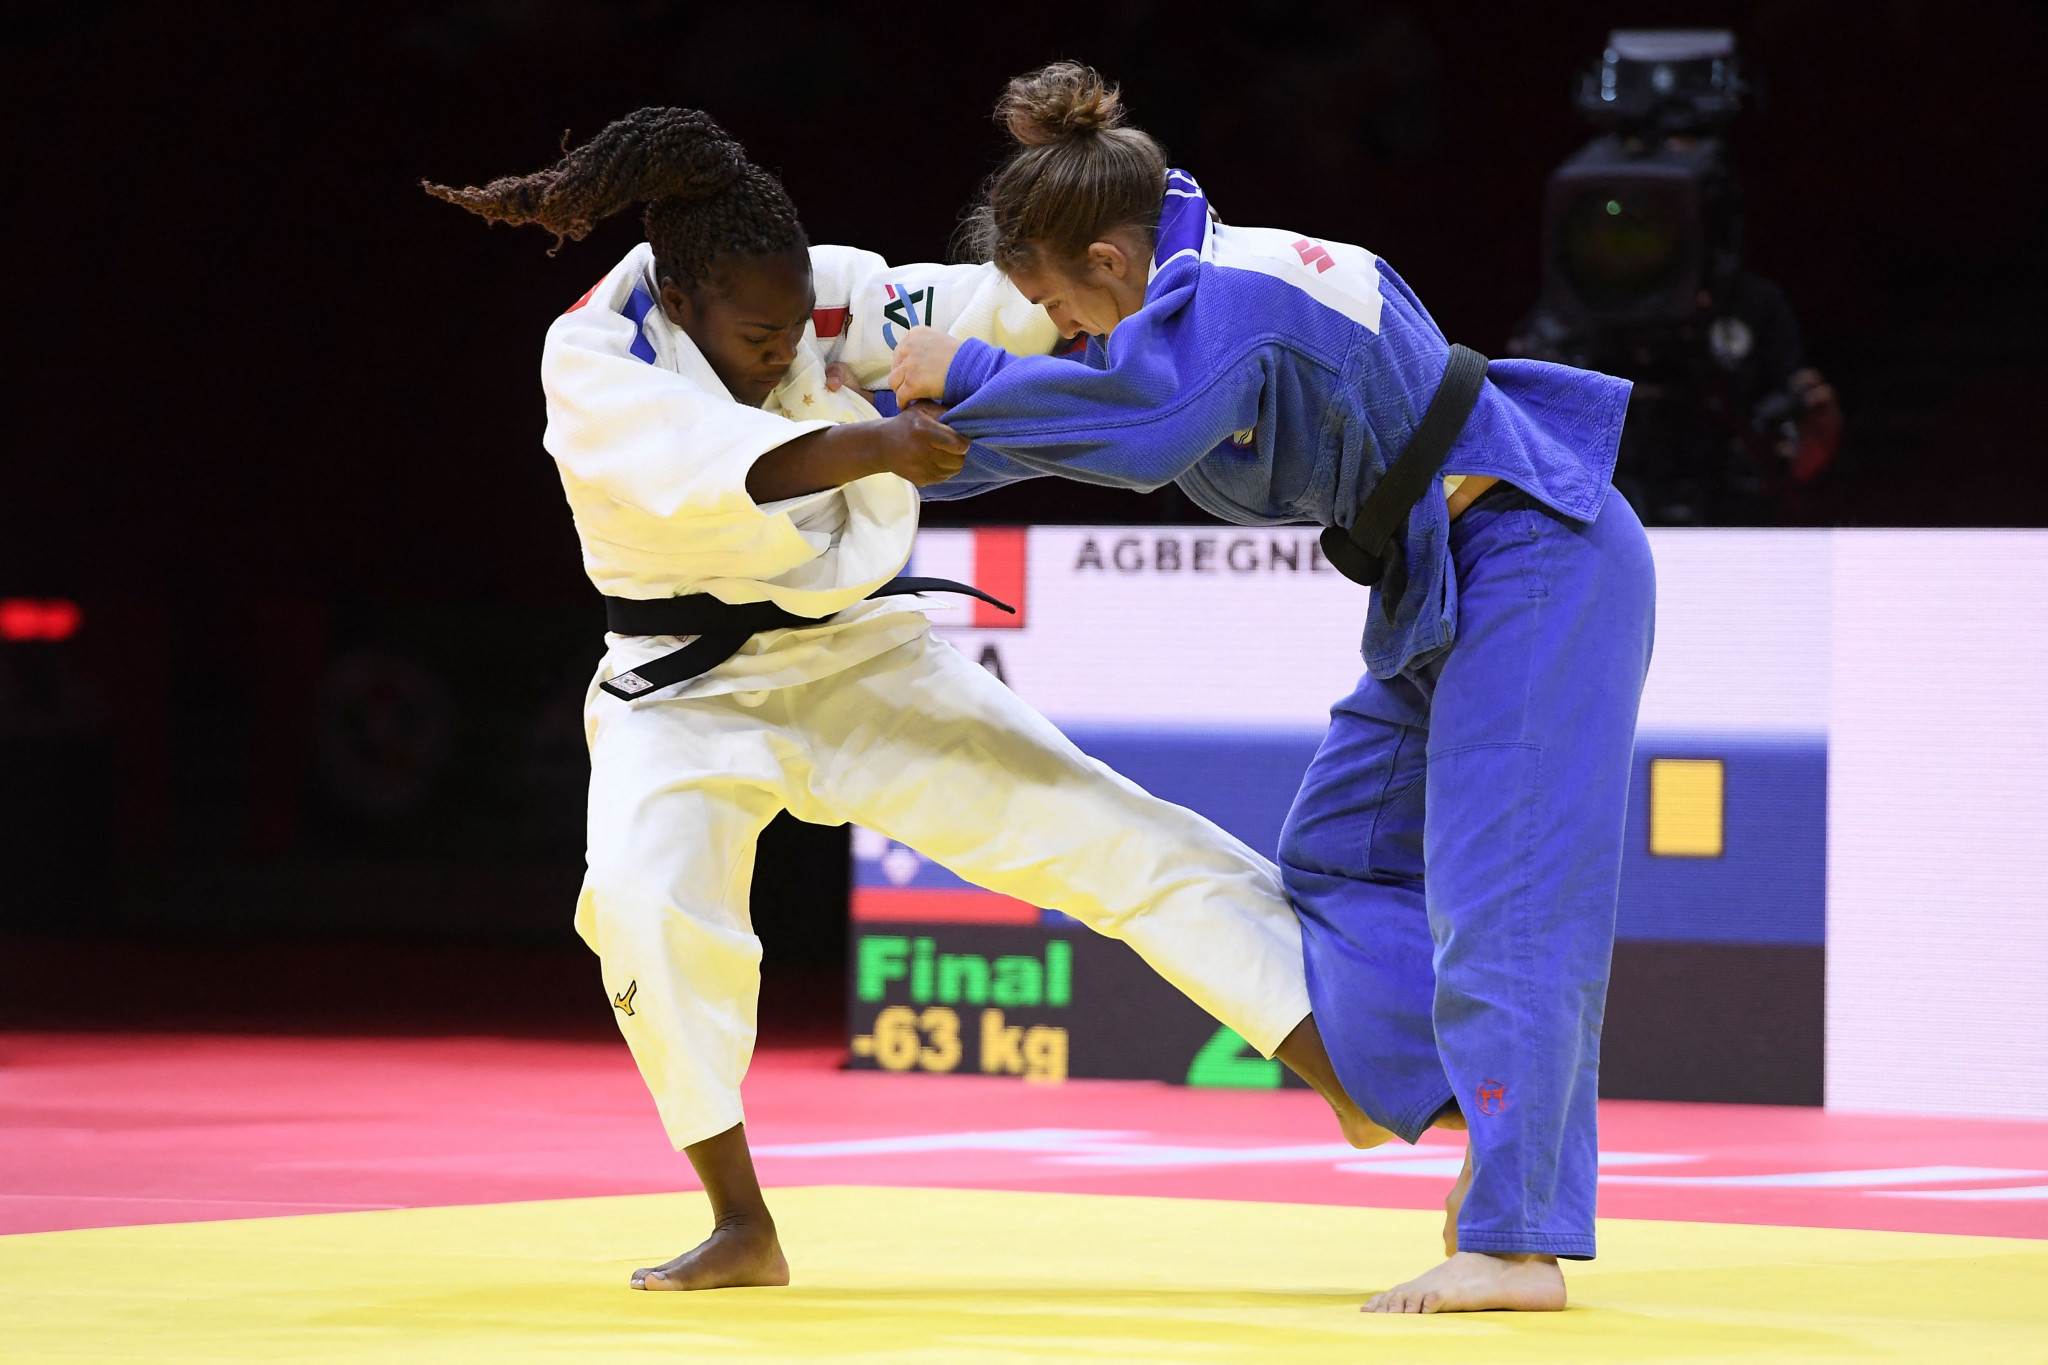 Clarisse Agbegnenou, in white, proved too strong for Andreja Leški in the women's under-63kg final at the World Championships ©Getty Images